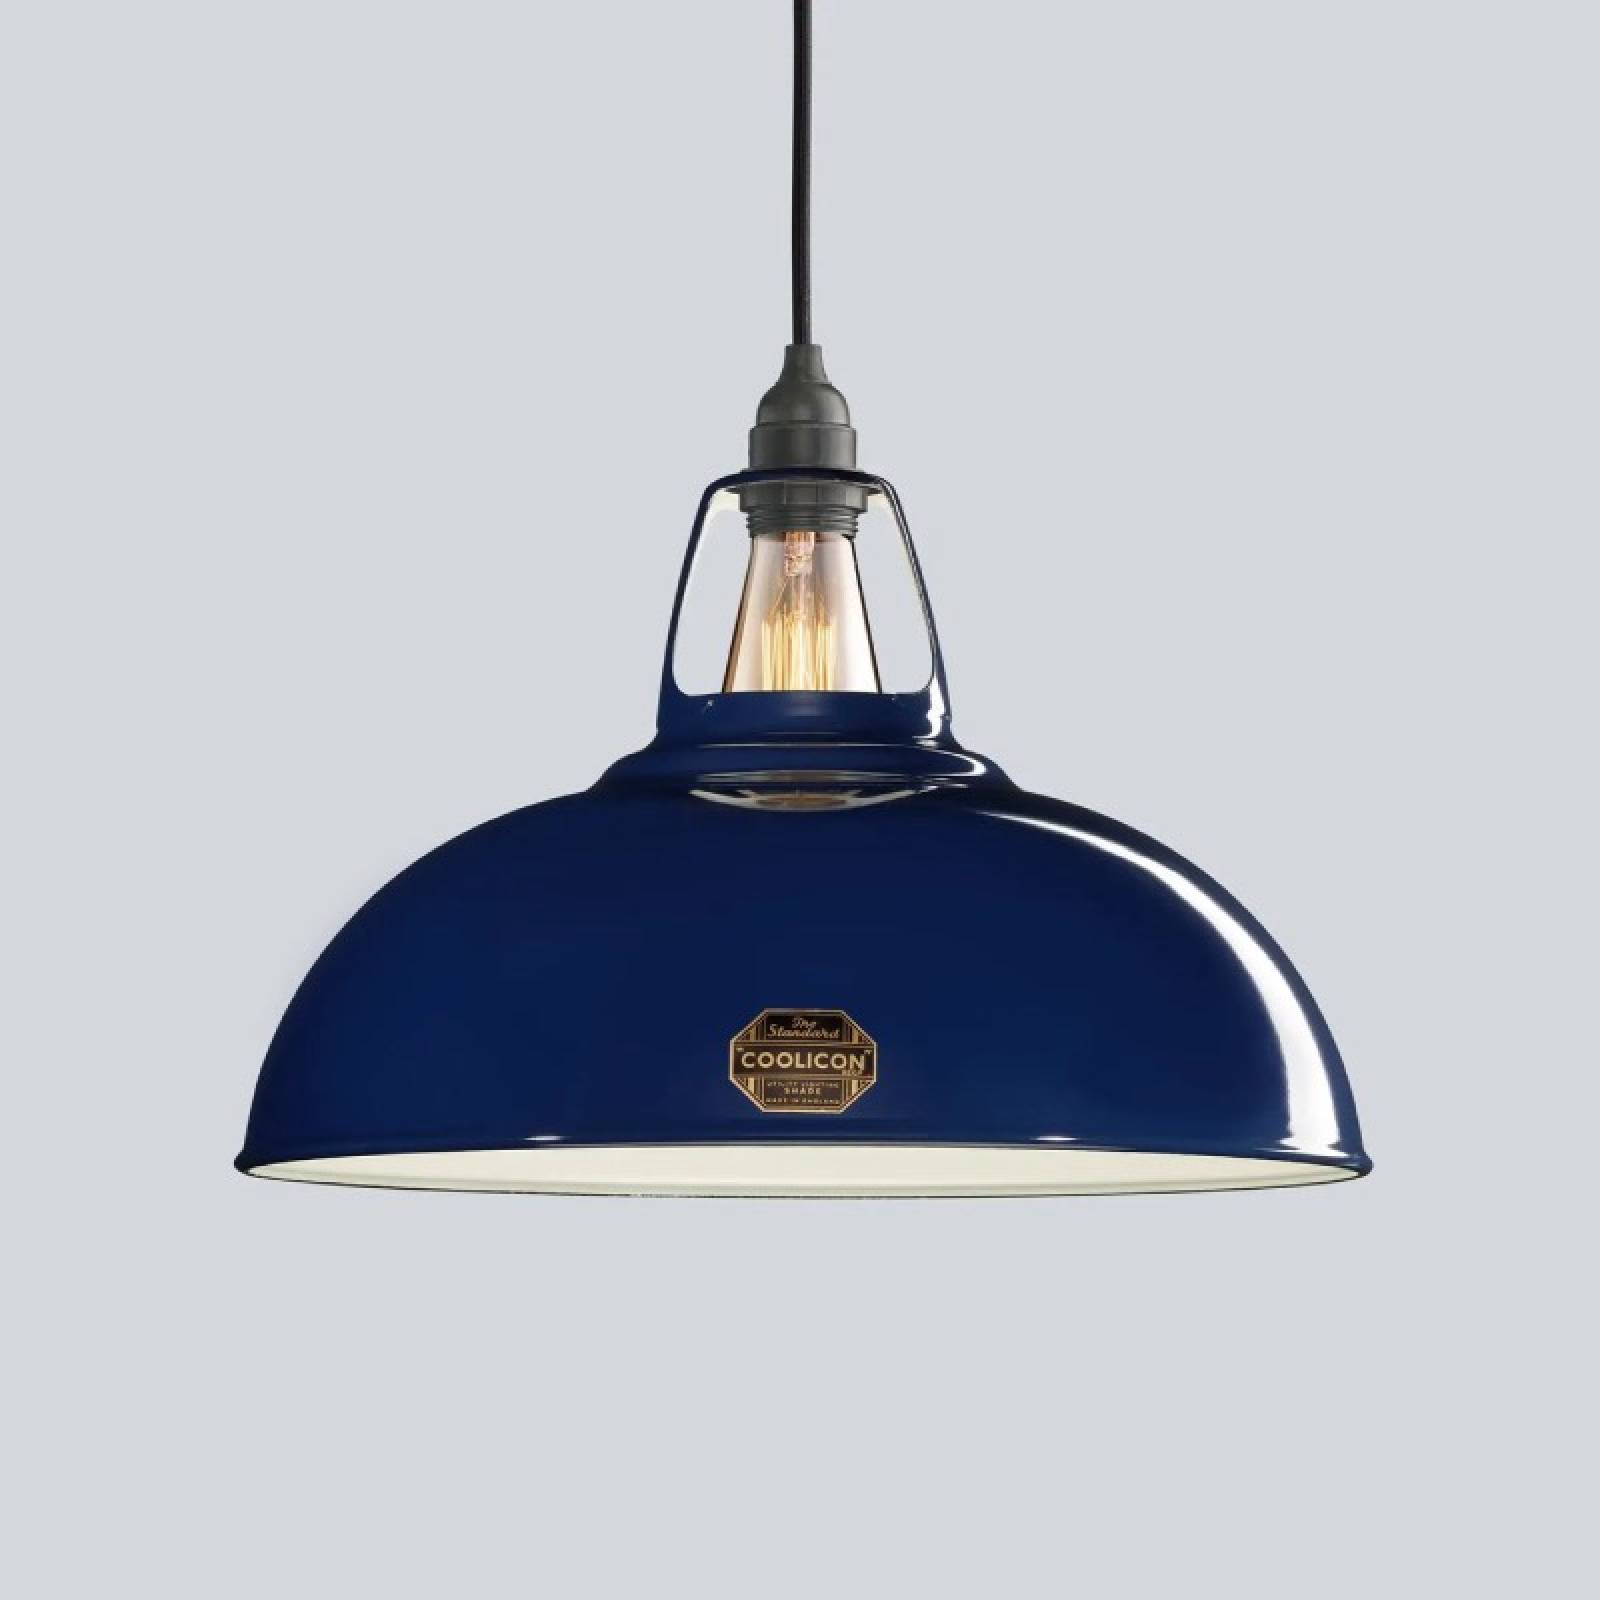 Classic Large Enamel Shade In Royal Blue By Coolicon